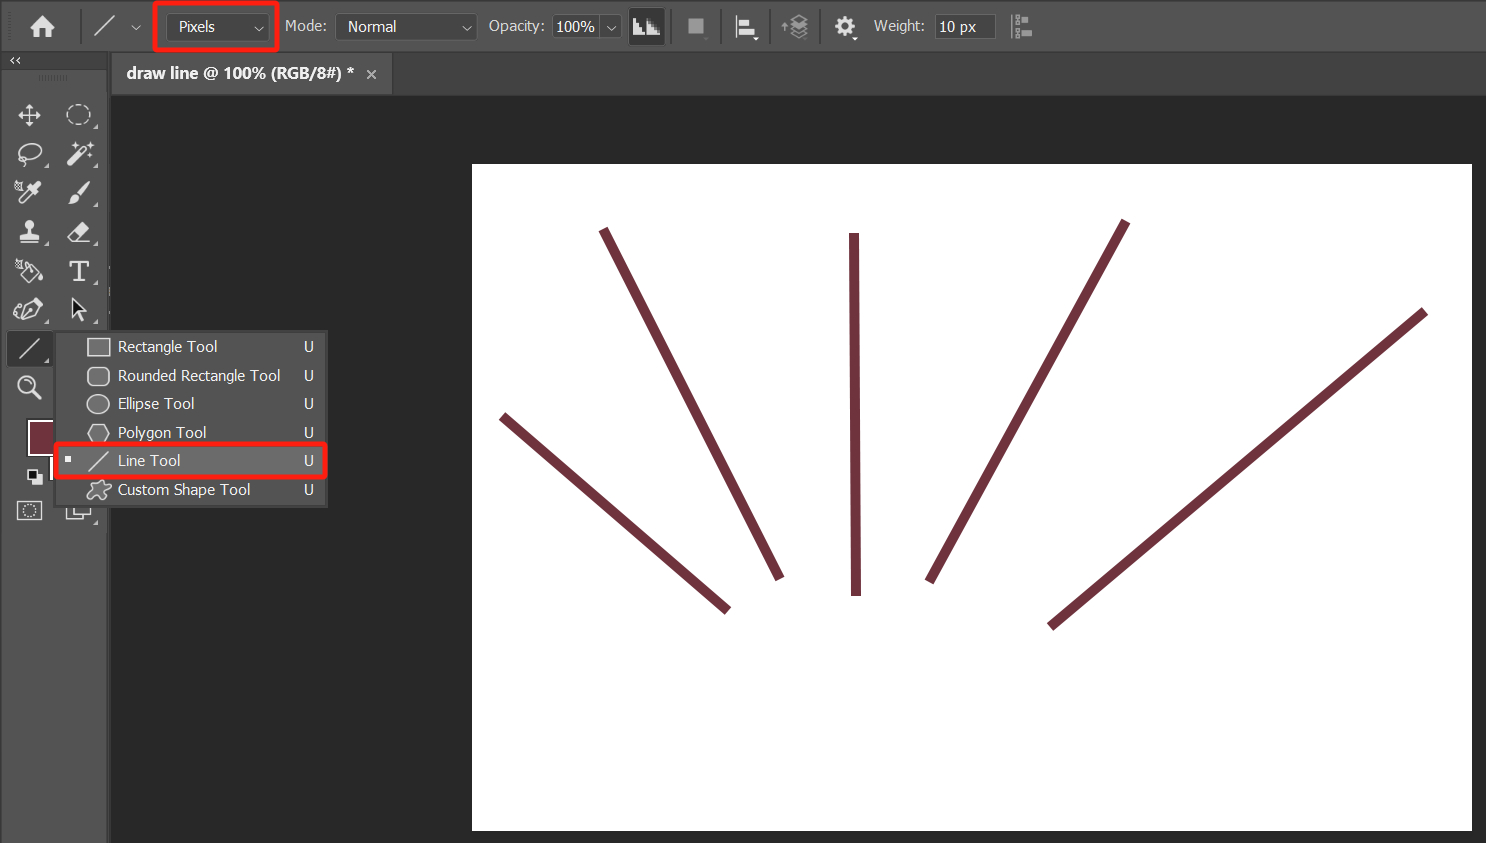 draw a straight line in Photoshop